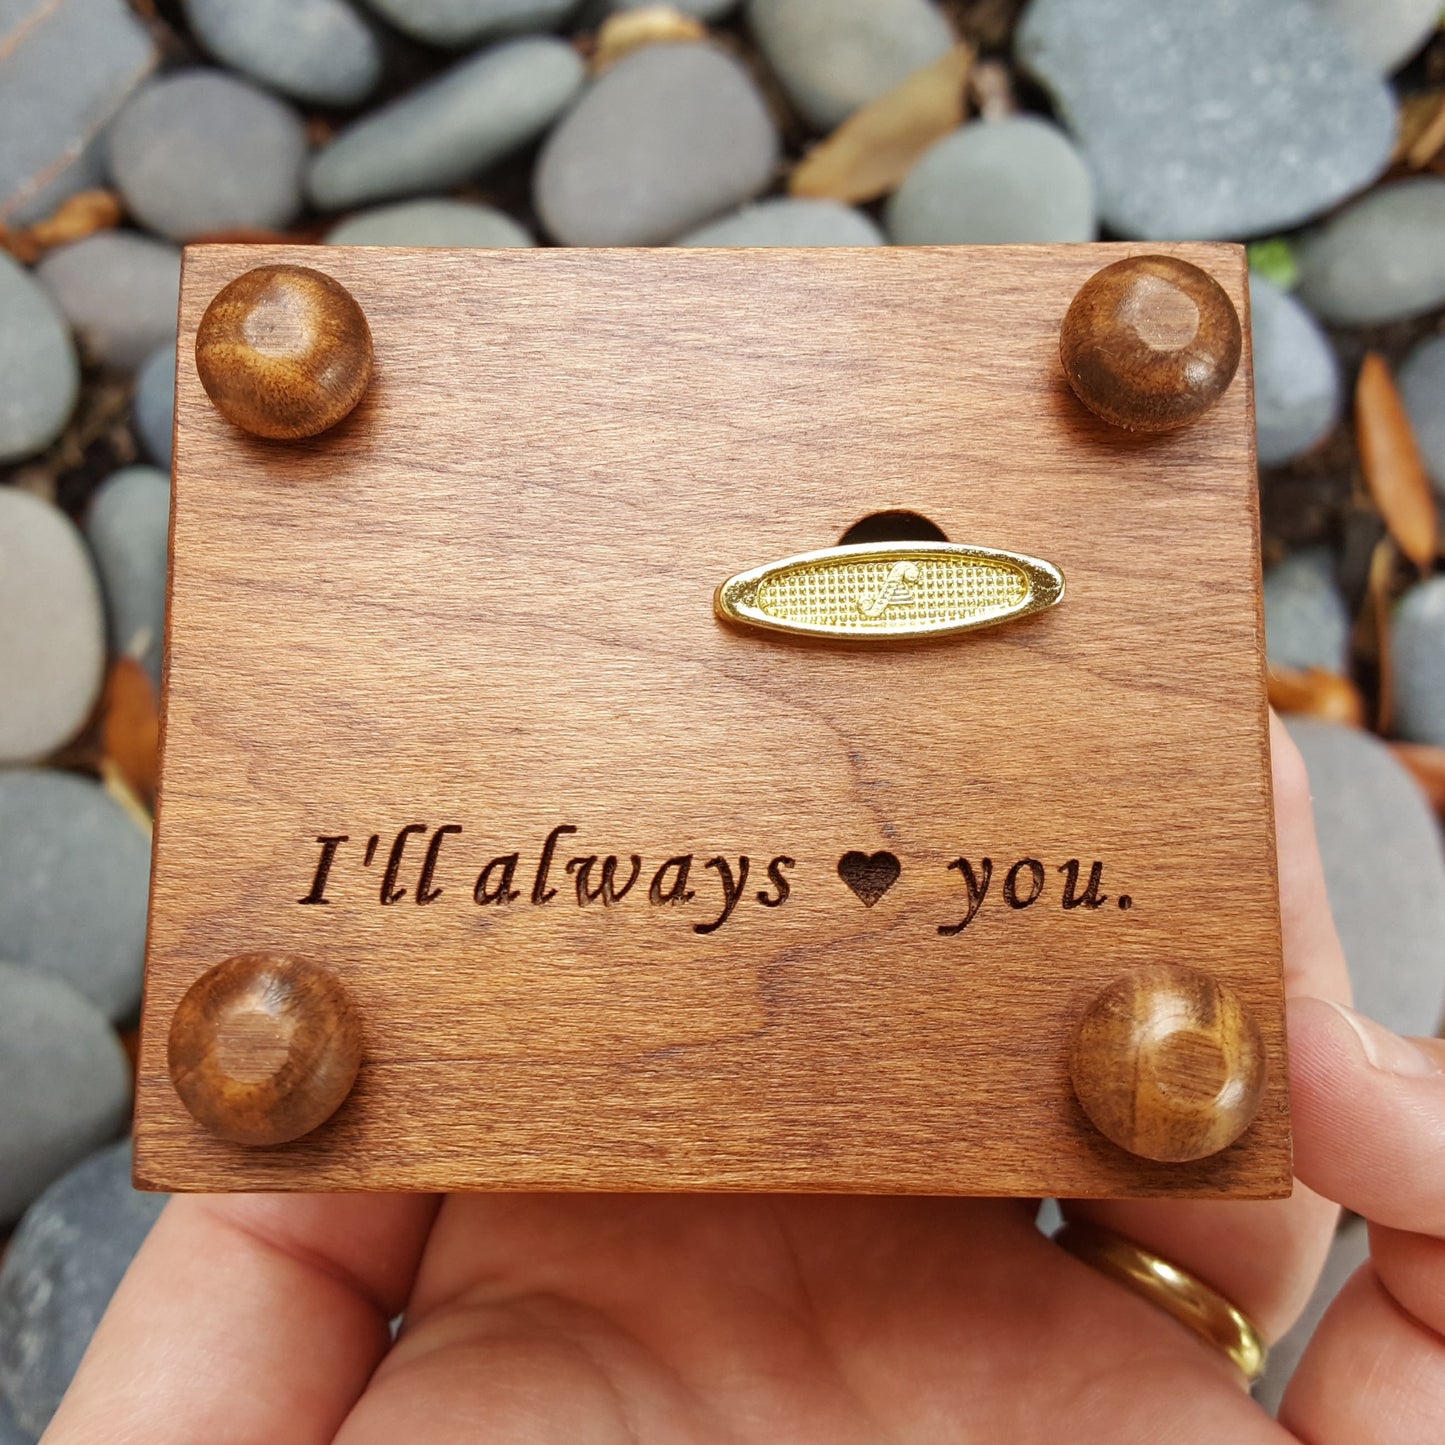 I willl always love you music box, customized engraving on music box